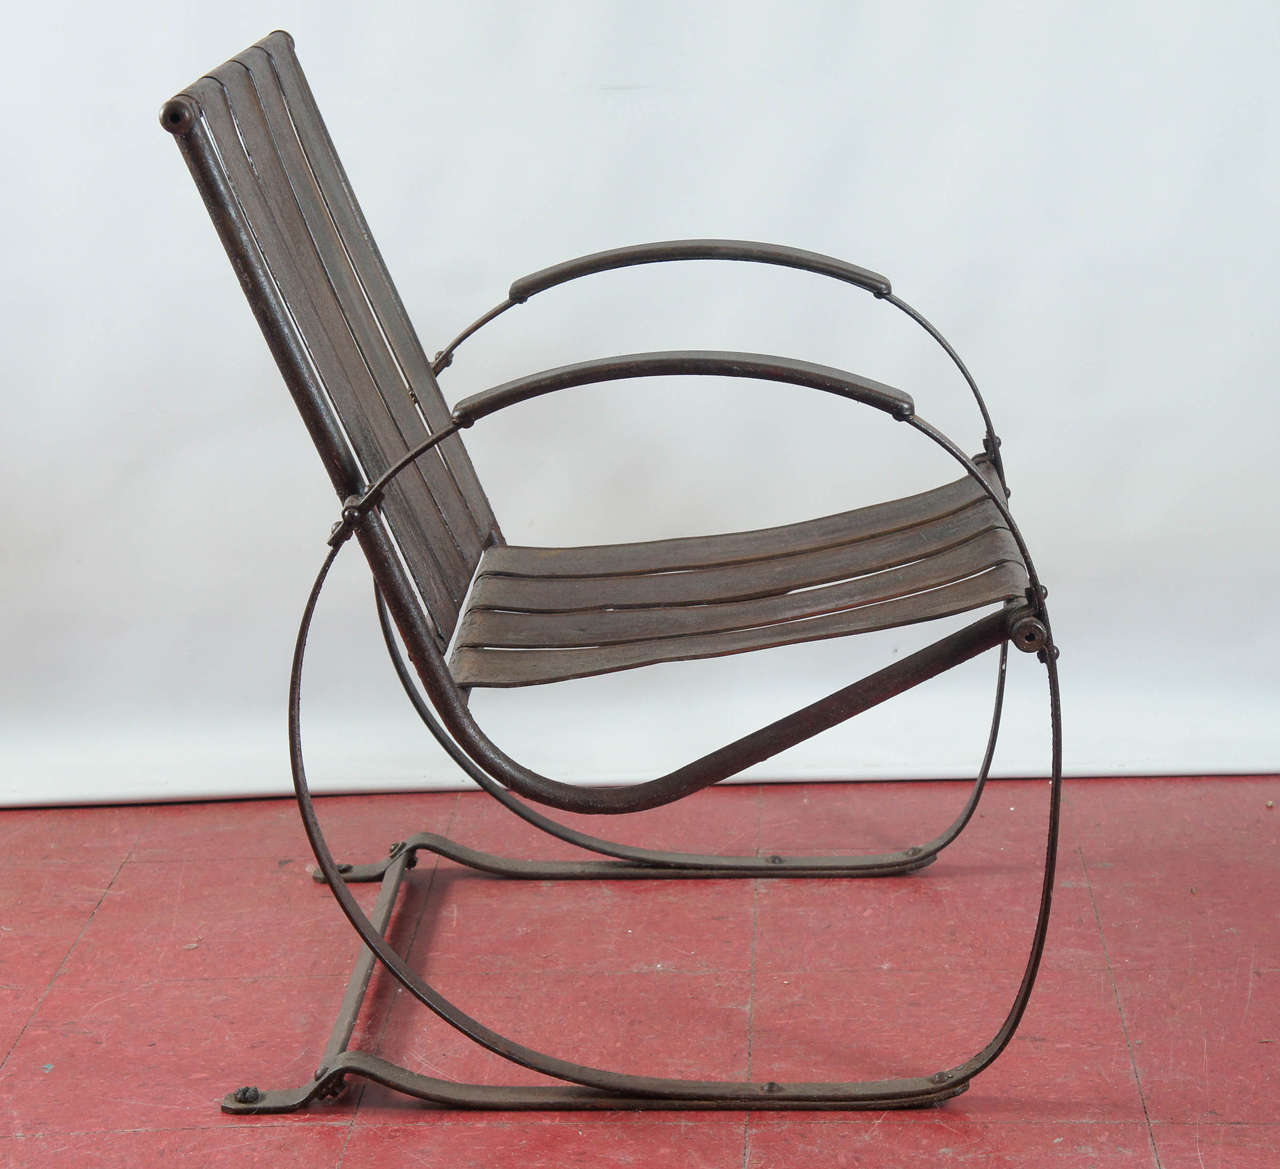 Other Slatted Iron Garden Chair